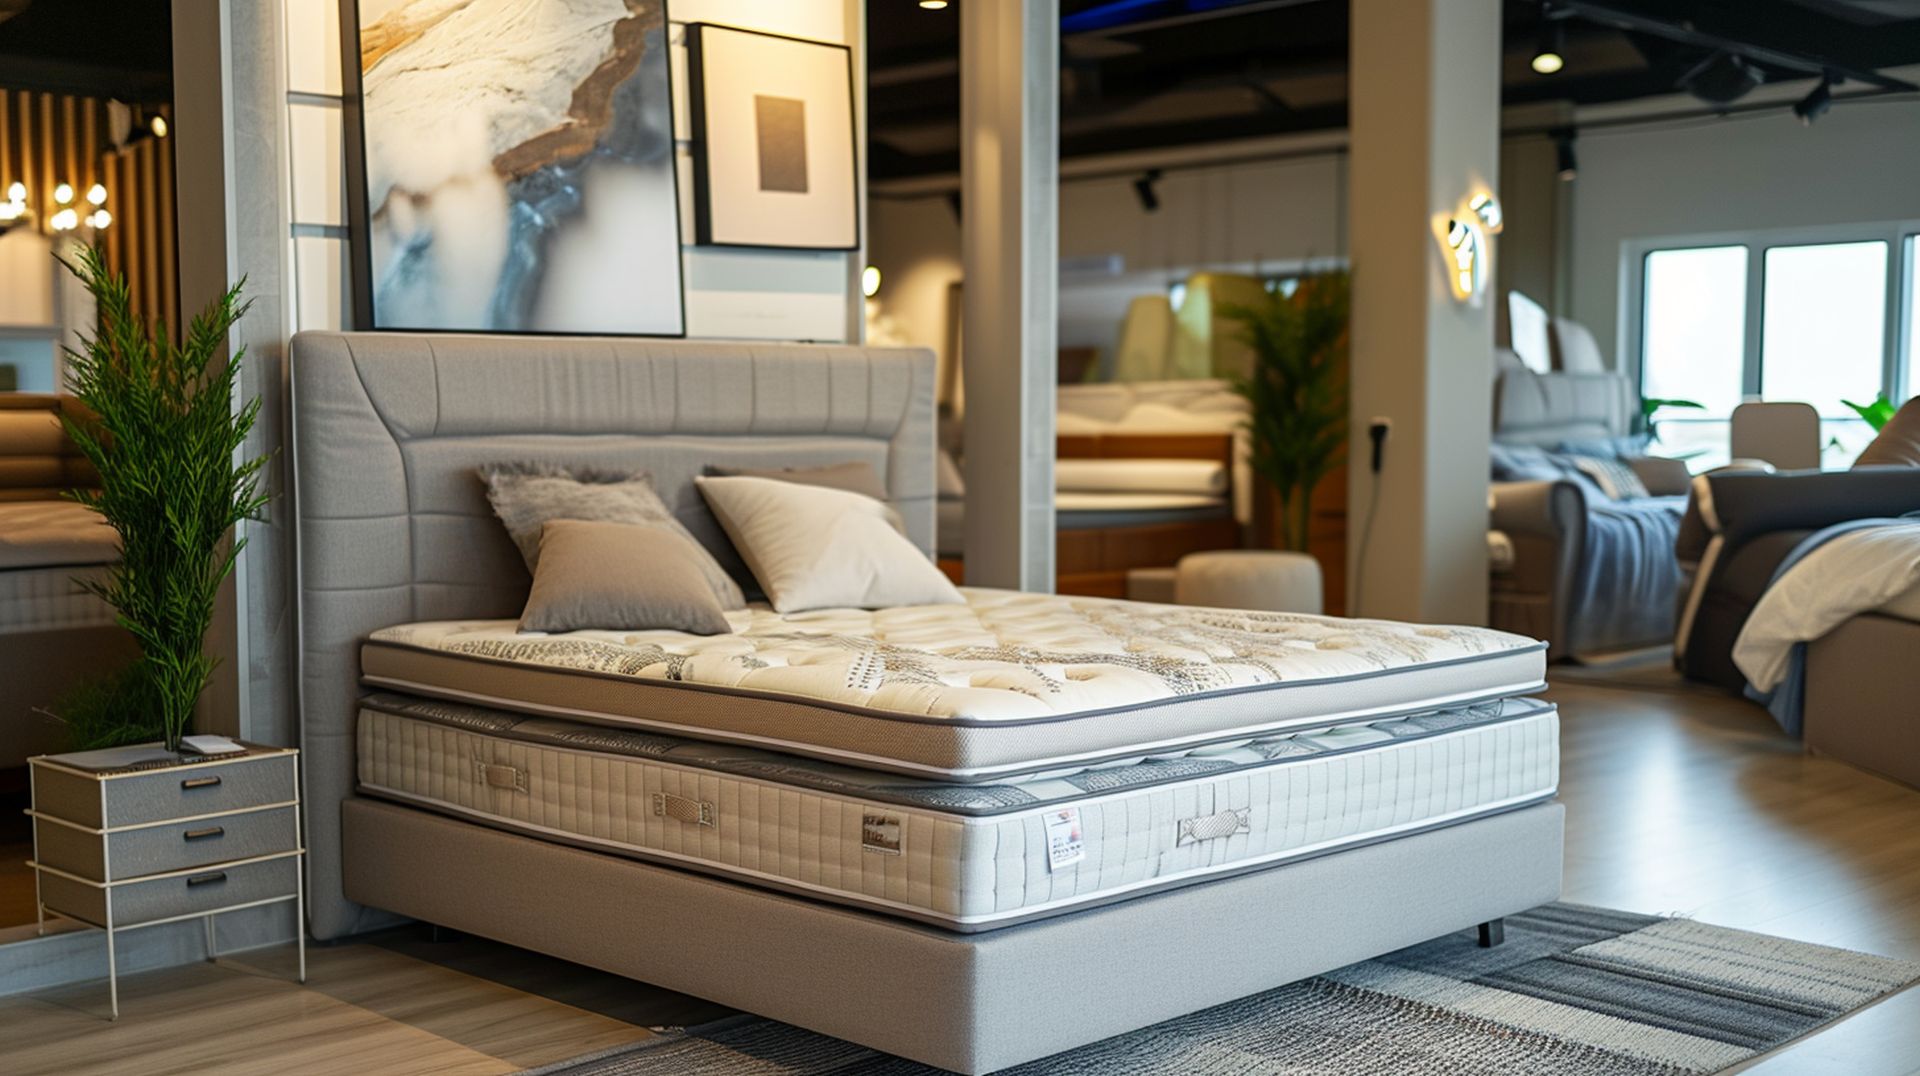 Types of mattresses at mattress dealers in Lincoln, NE